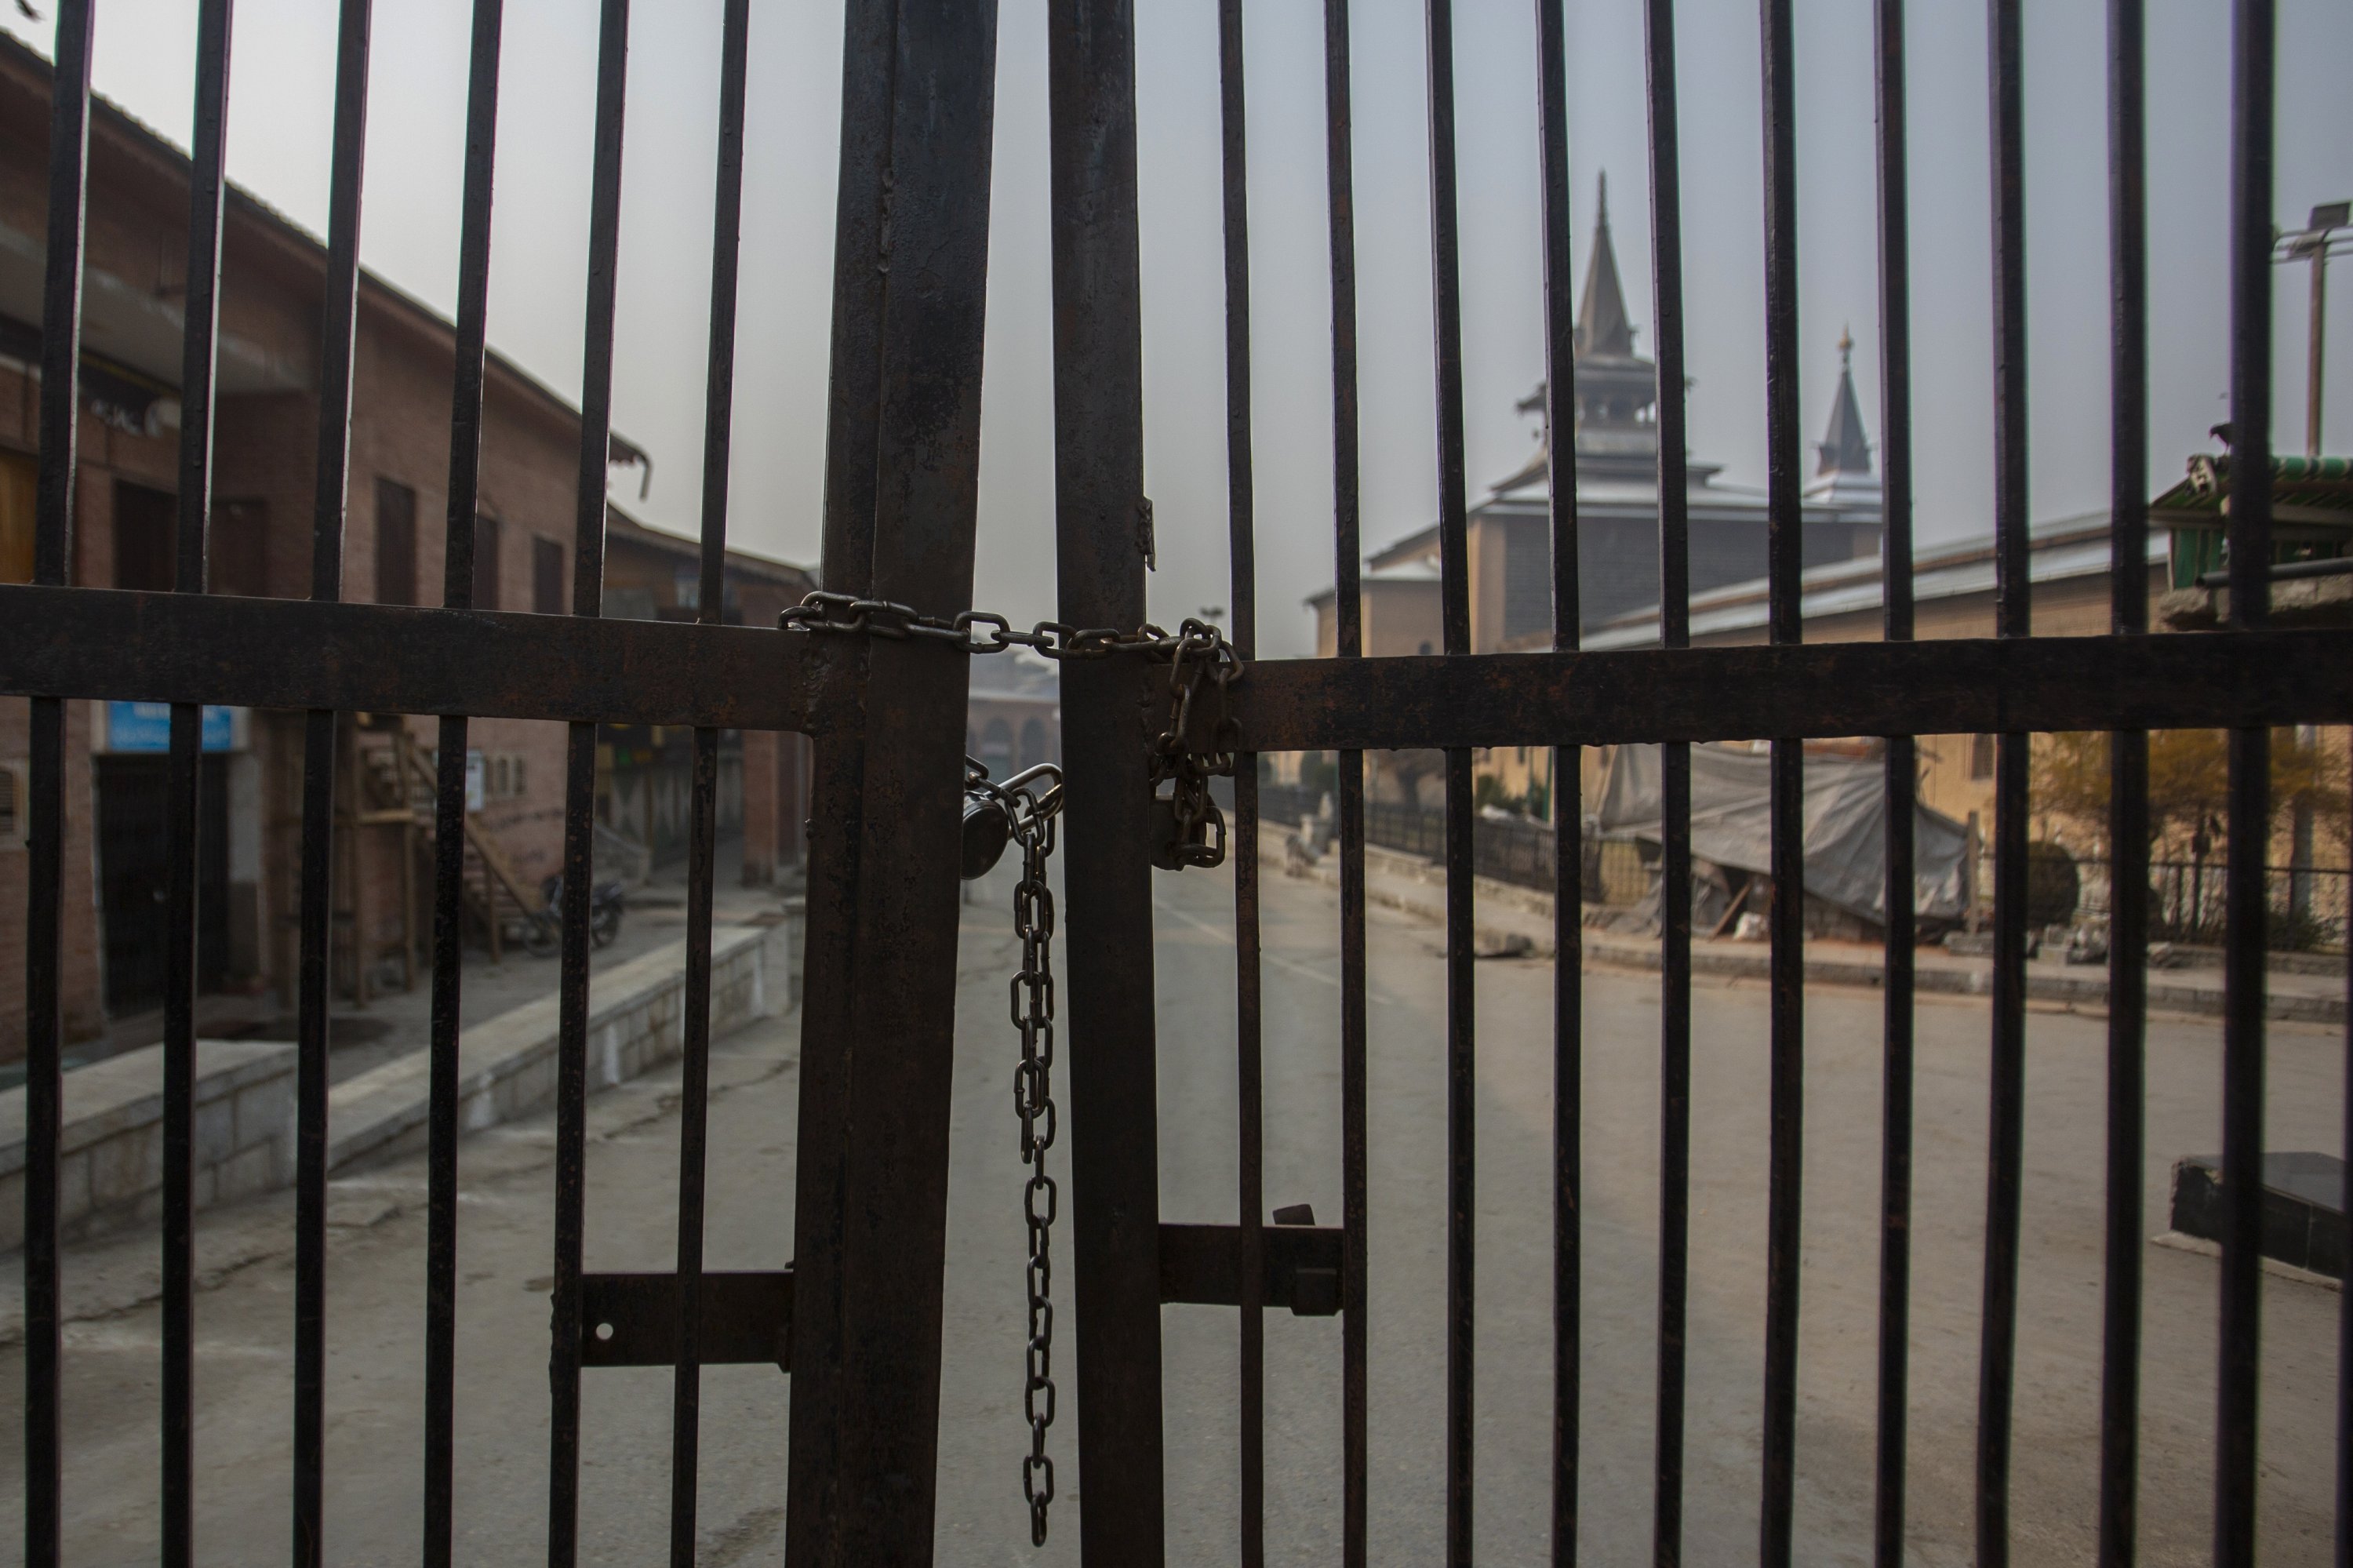 Kashmir's Jamia Masjid, or the grand mosque, is seen through its gate that remains locked on Fridays in Srinagar, Indian-controlled Kashmir, Nov. 26, 2021. (AP Photo)